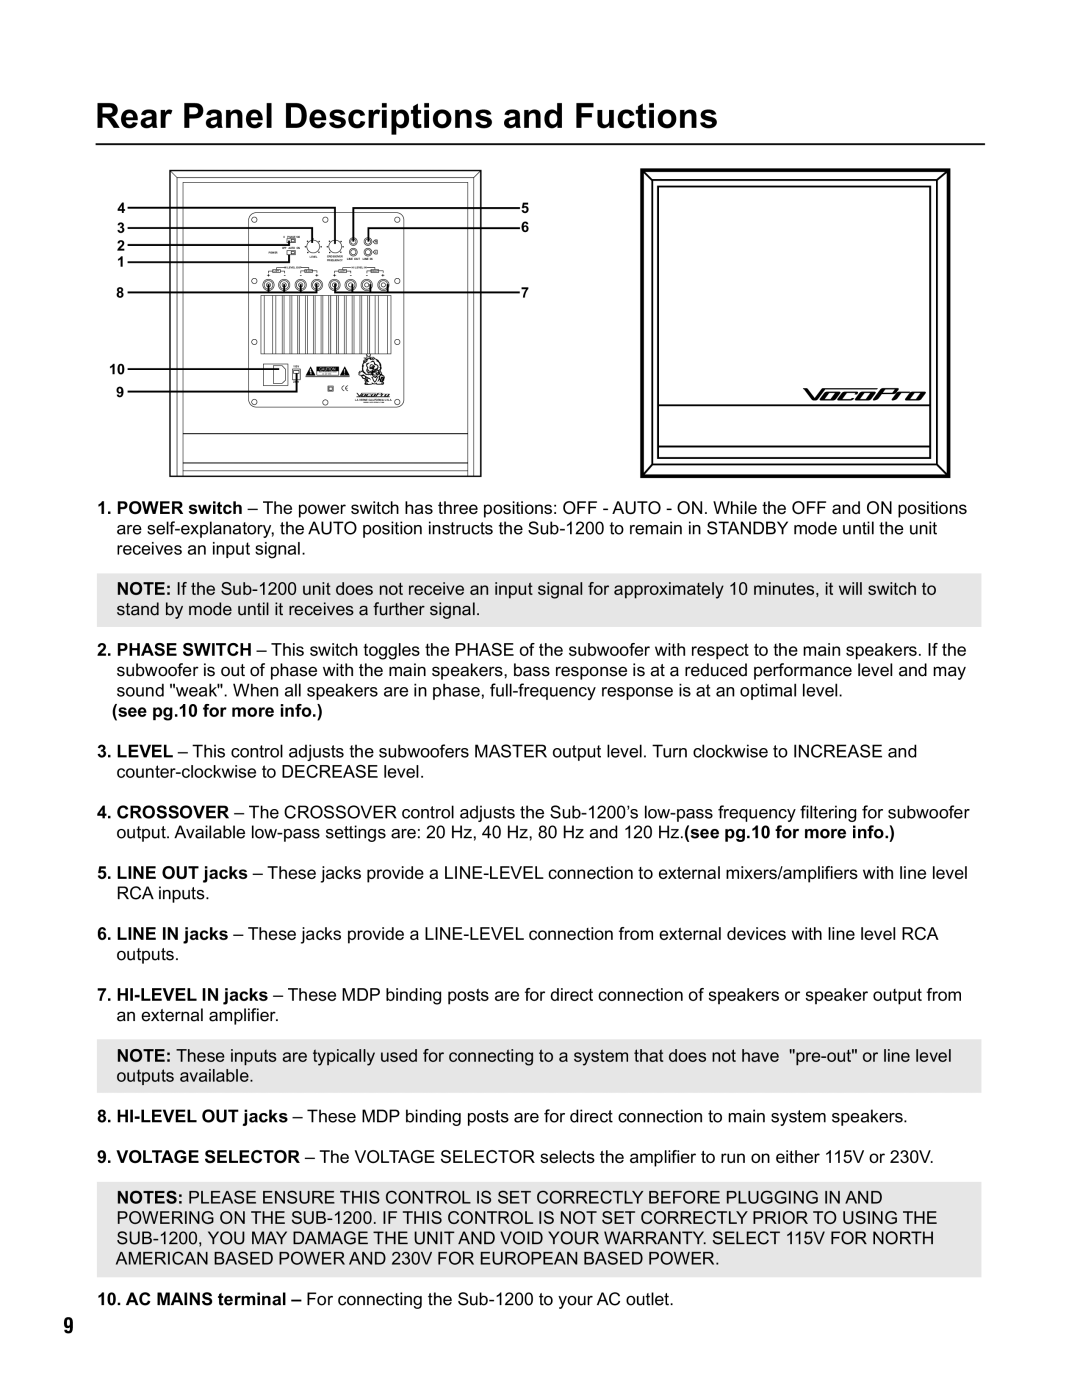 VocoPro SUB-1200 instruction manual Rear Panel Descriptions and Fuctions, see pg.10 for more info 